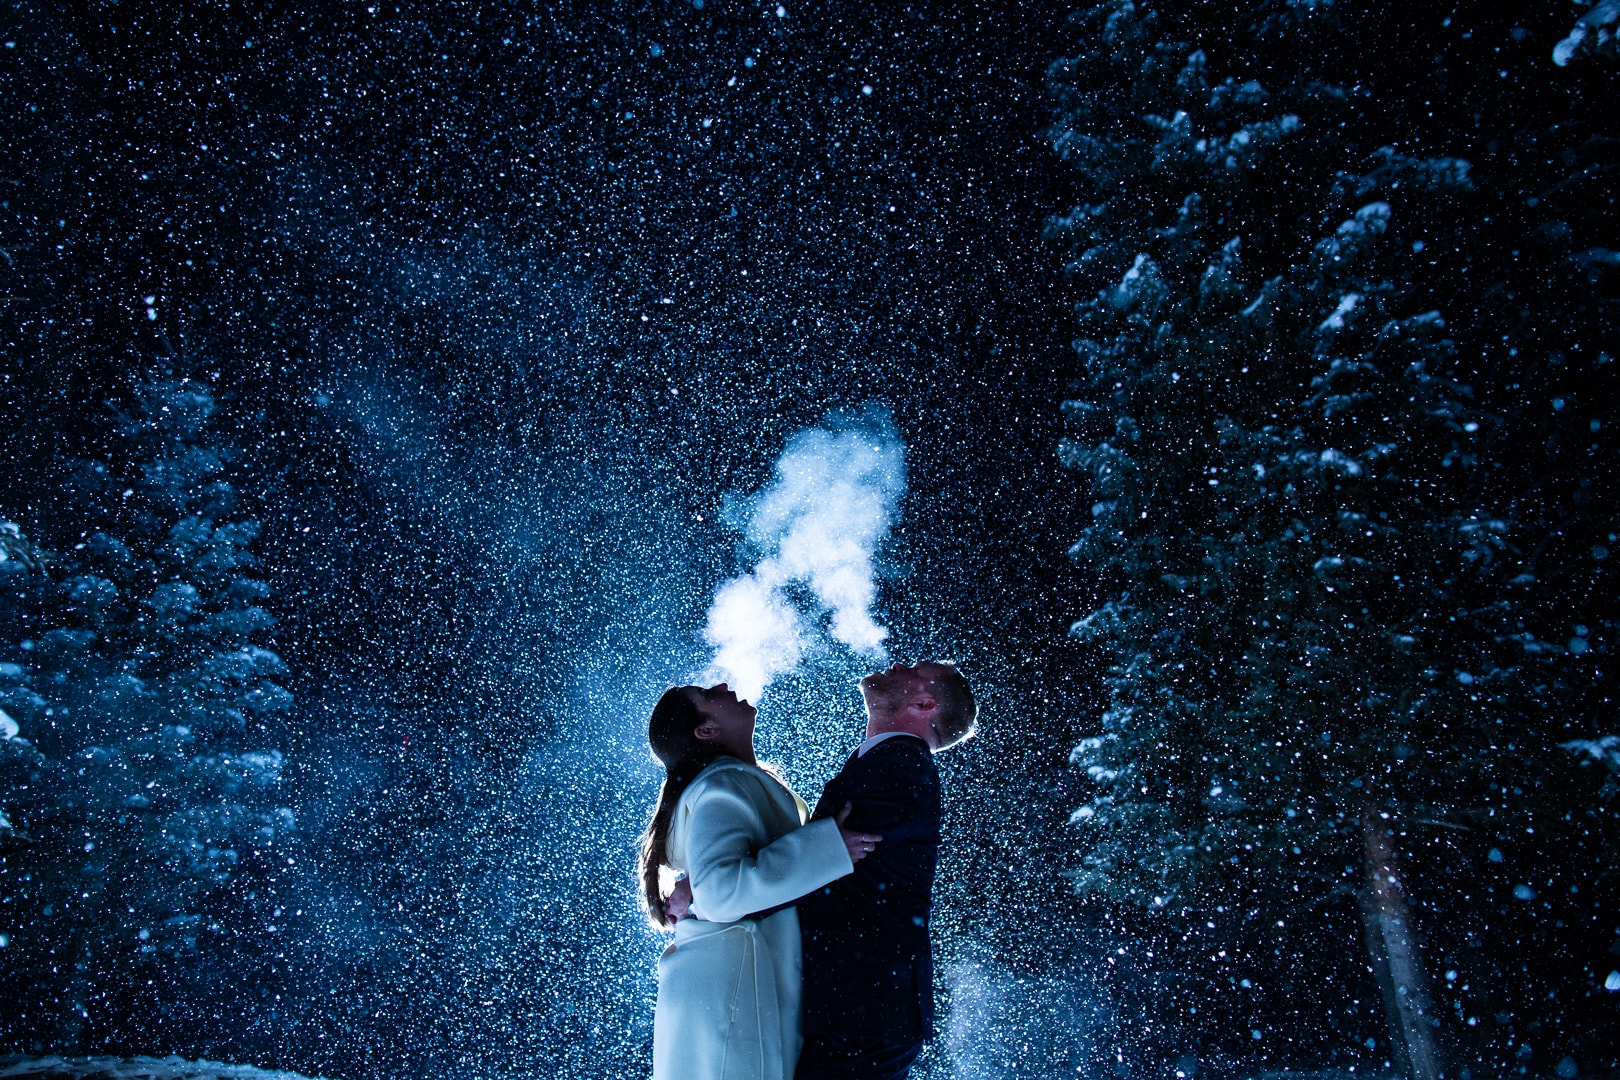 A bride and groom see their breath as snow falls around them after dark.